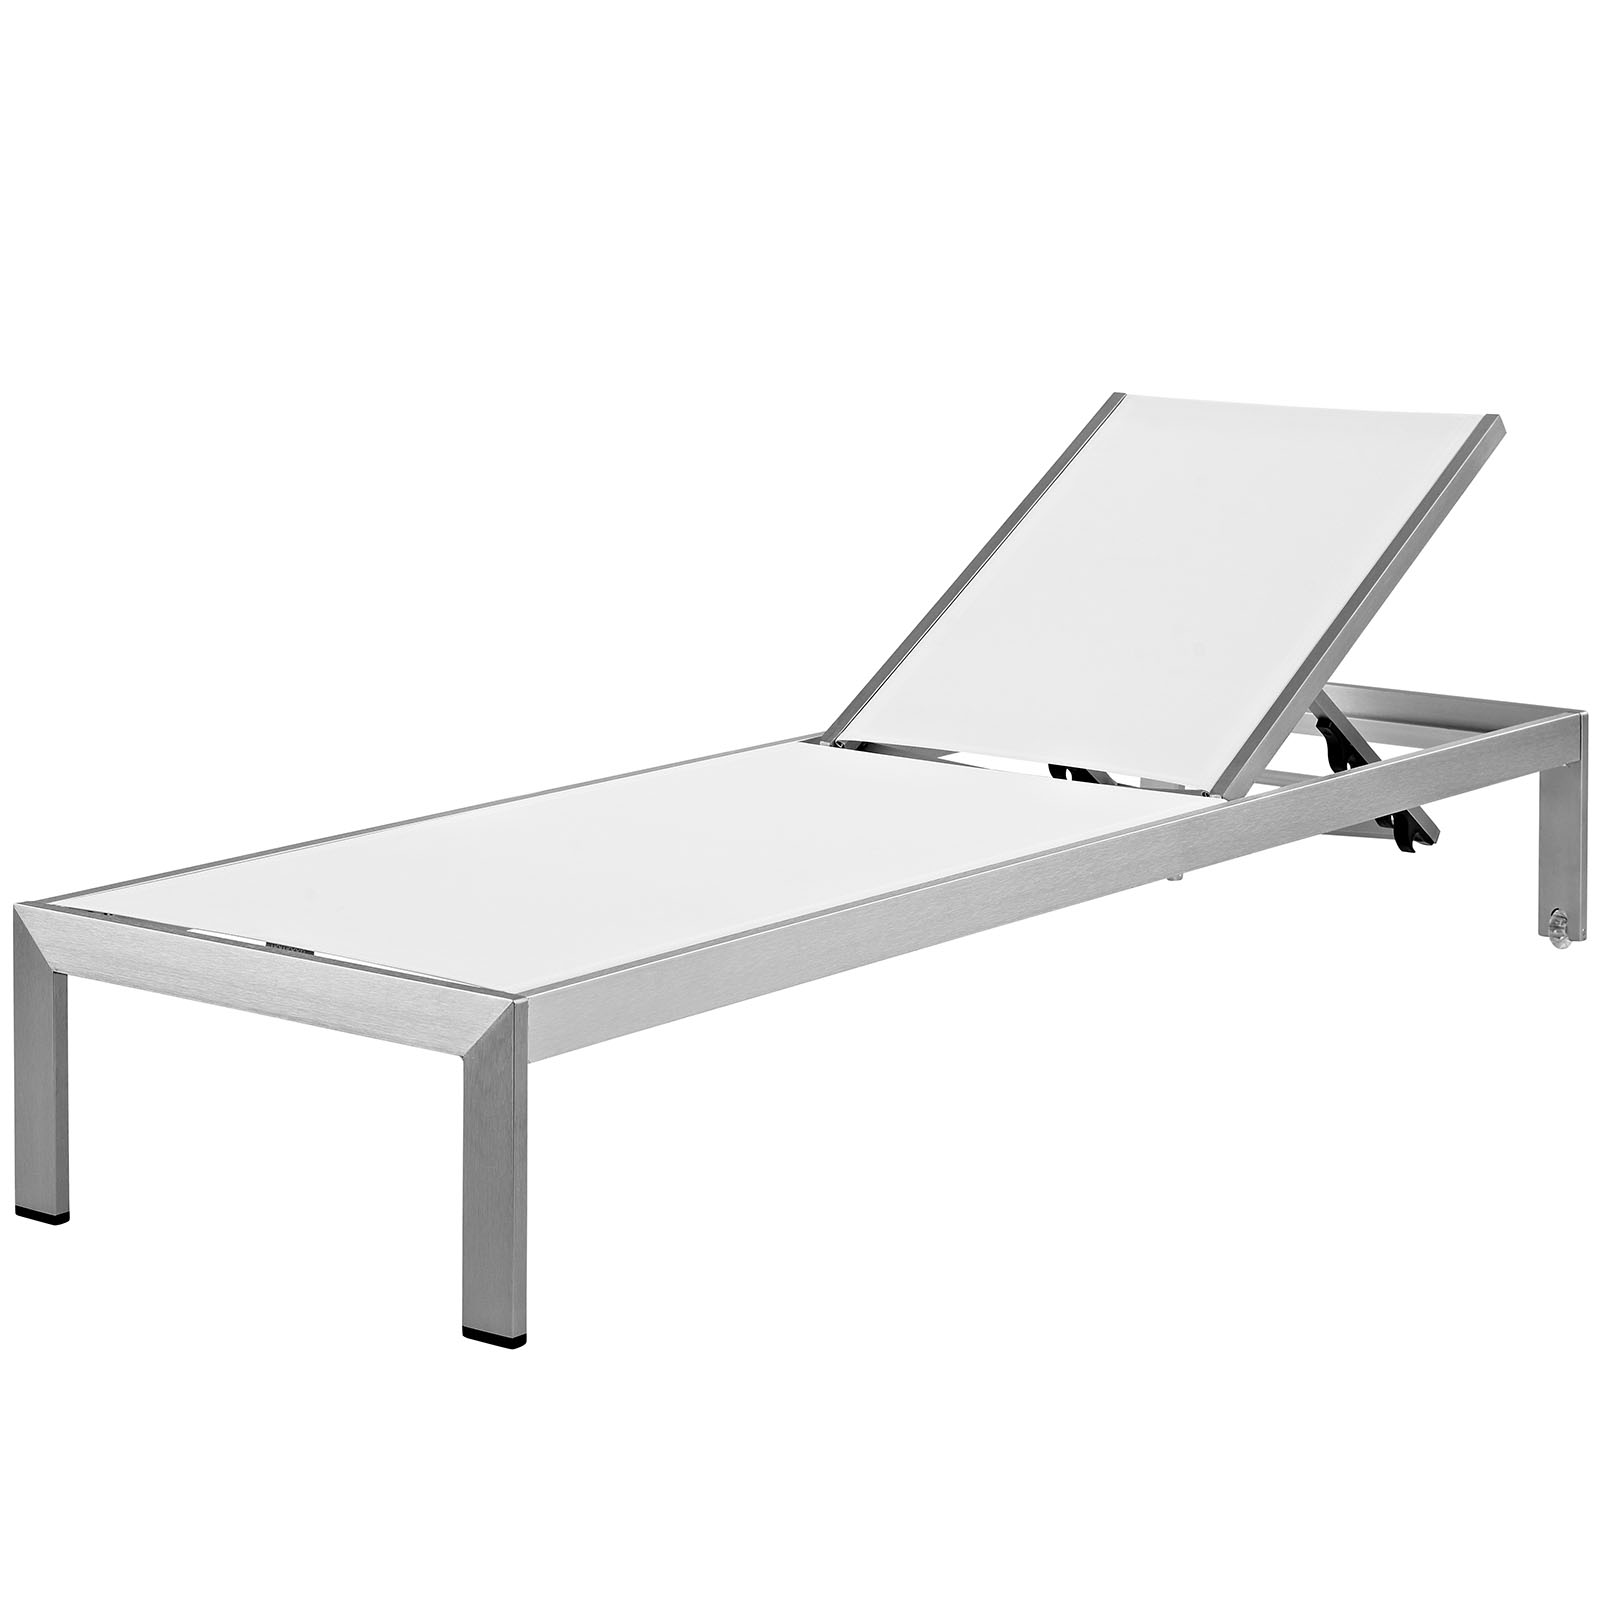 Modern Contemporary Urban Outdoor Patio Balcony Garden Furniture Lounge Chair Chaise and Side Table Set, Aluminum Metal Steel, White - image 3 of 7